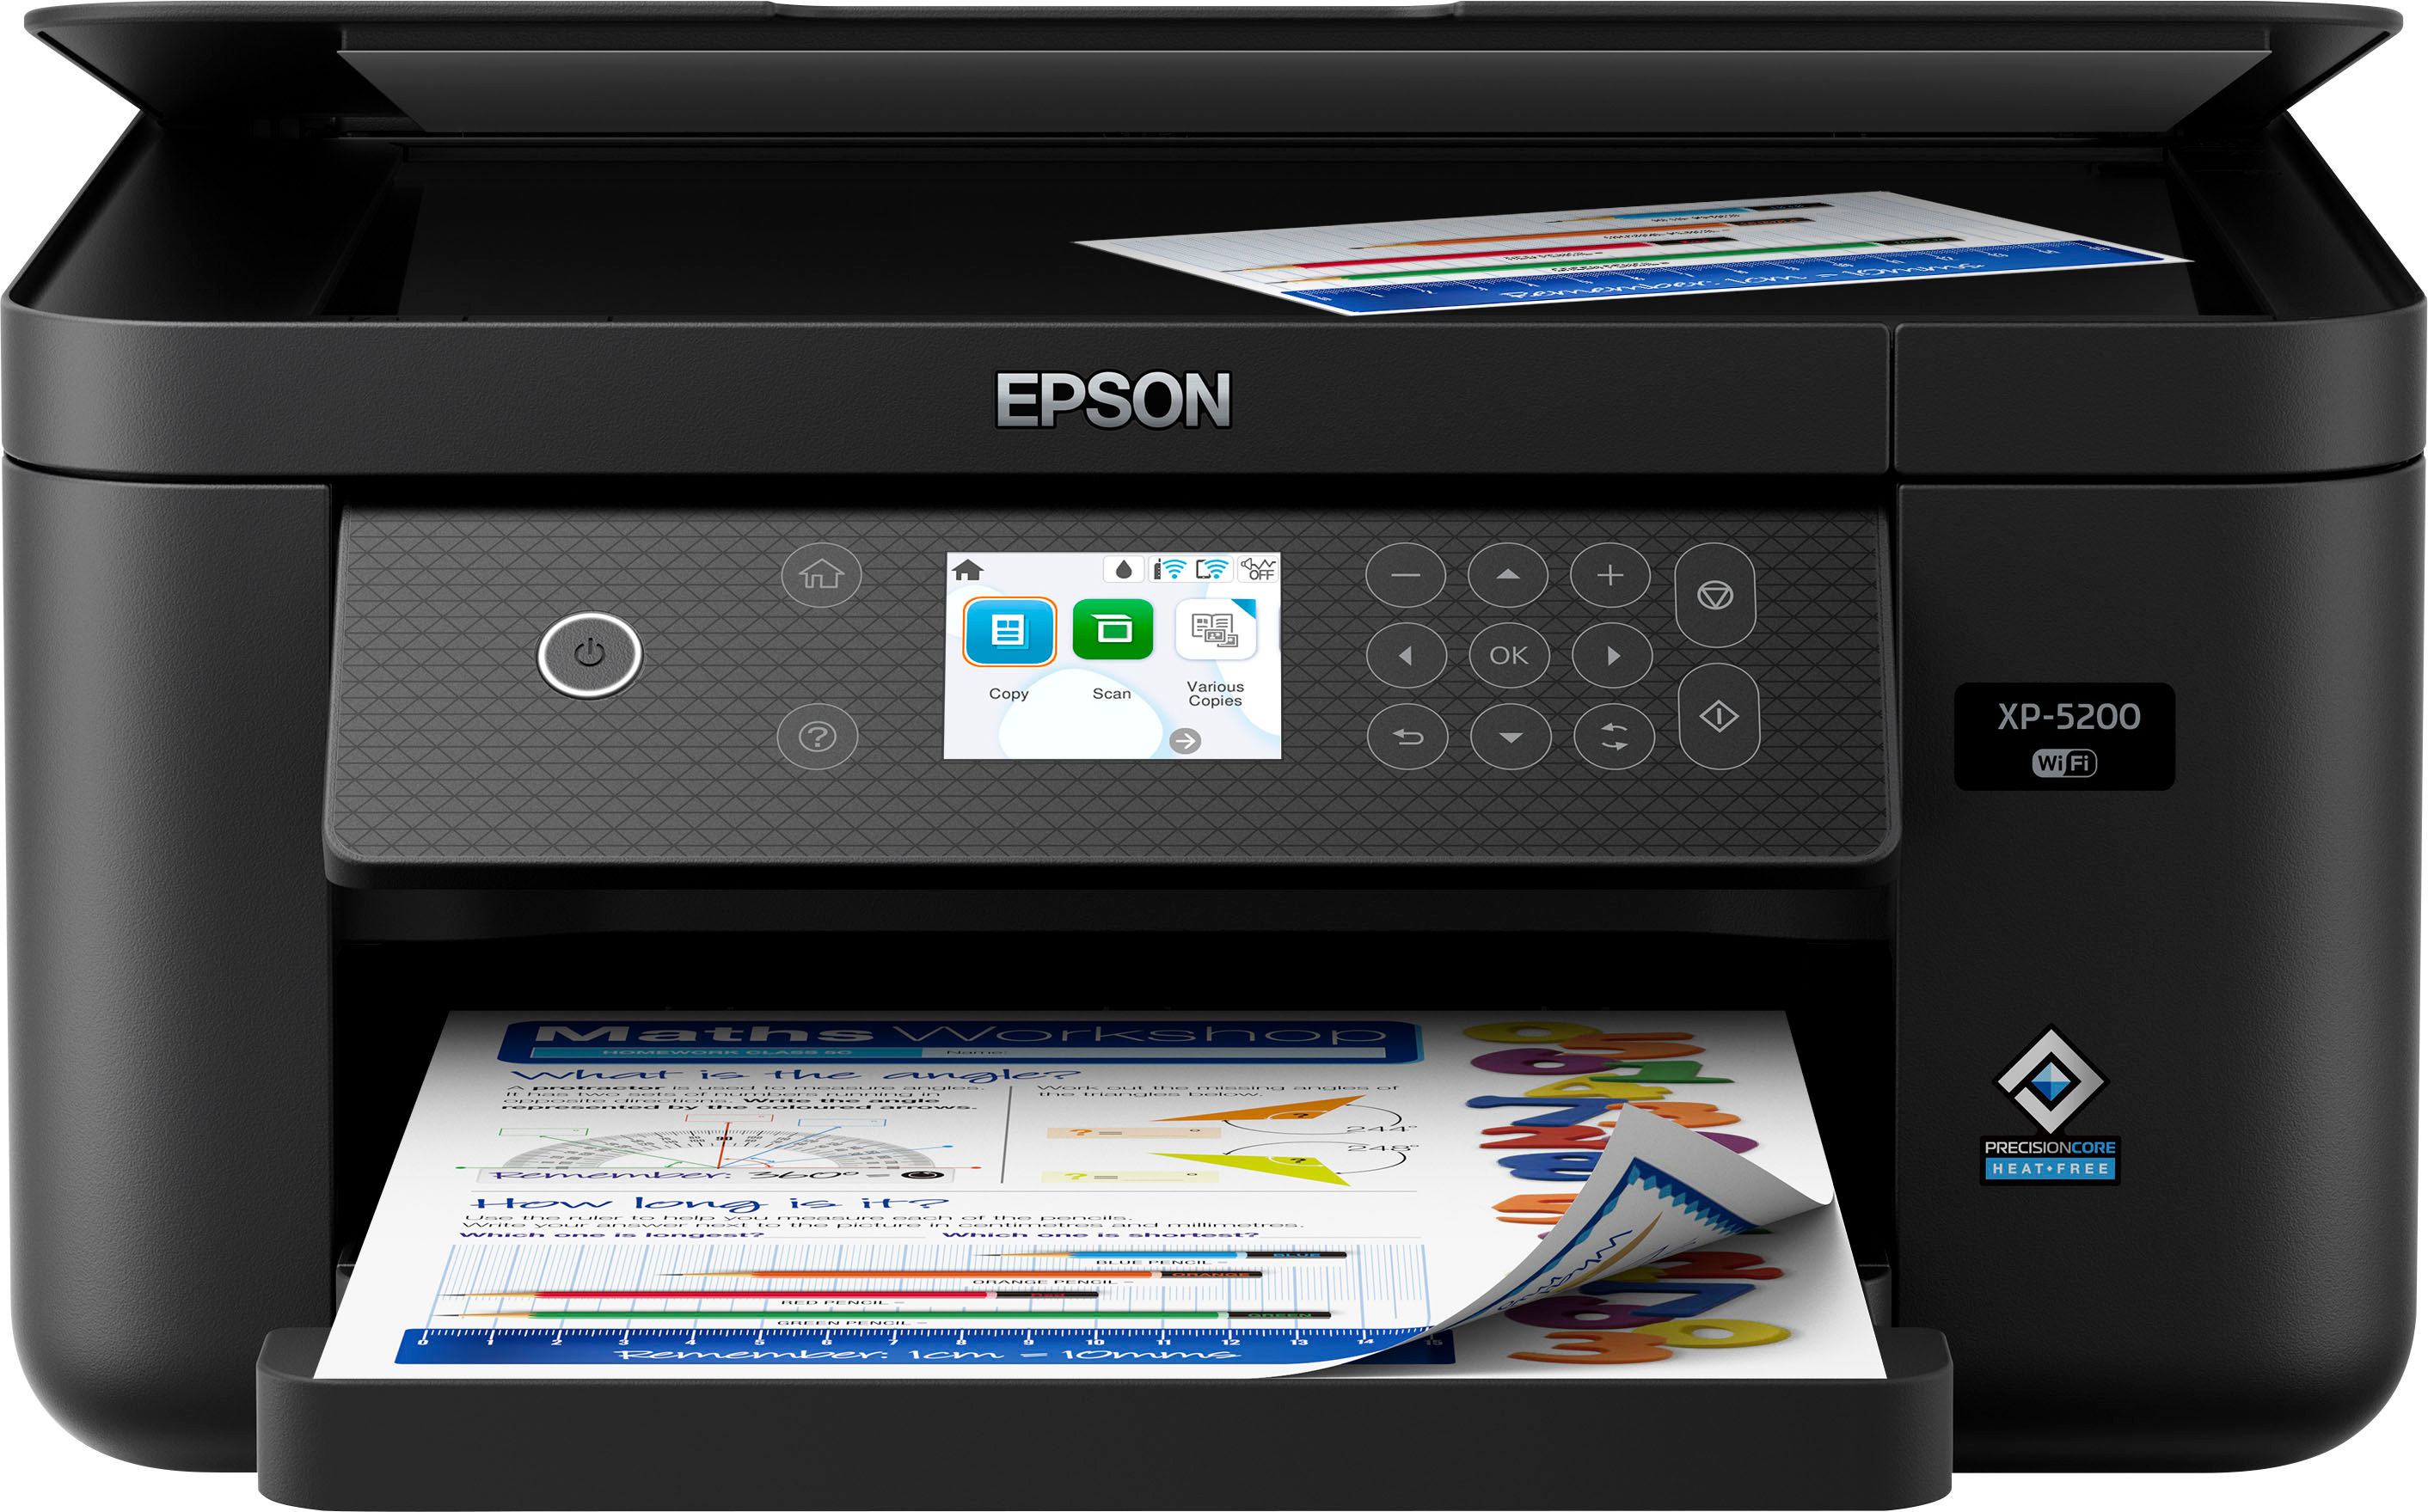 How to Copy Document Black and White & Colour on Epson XP -2200